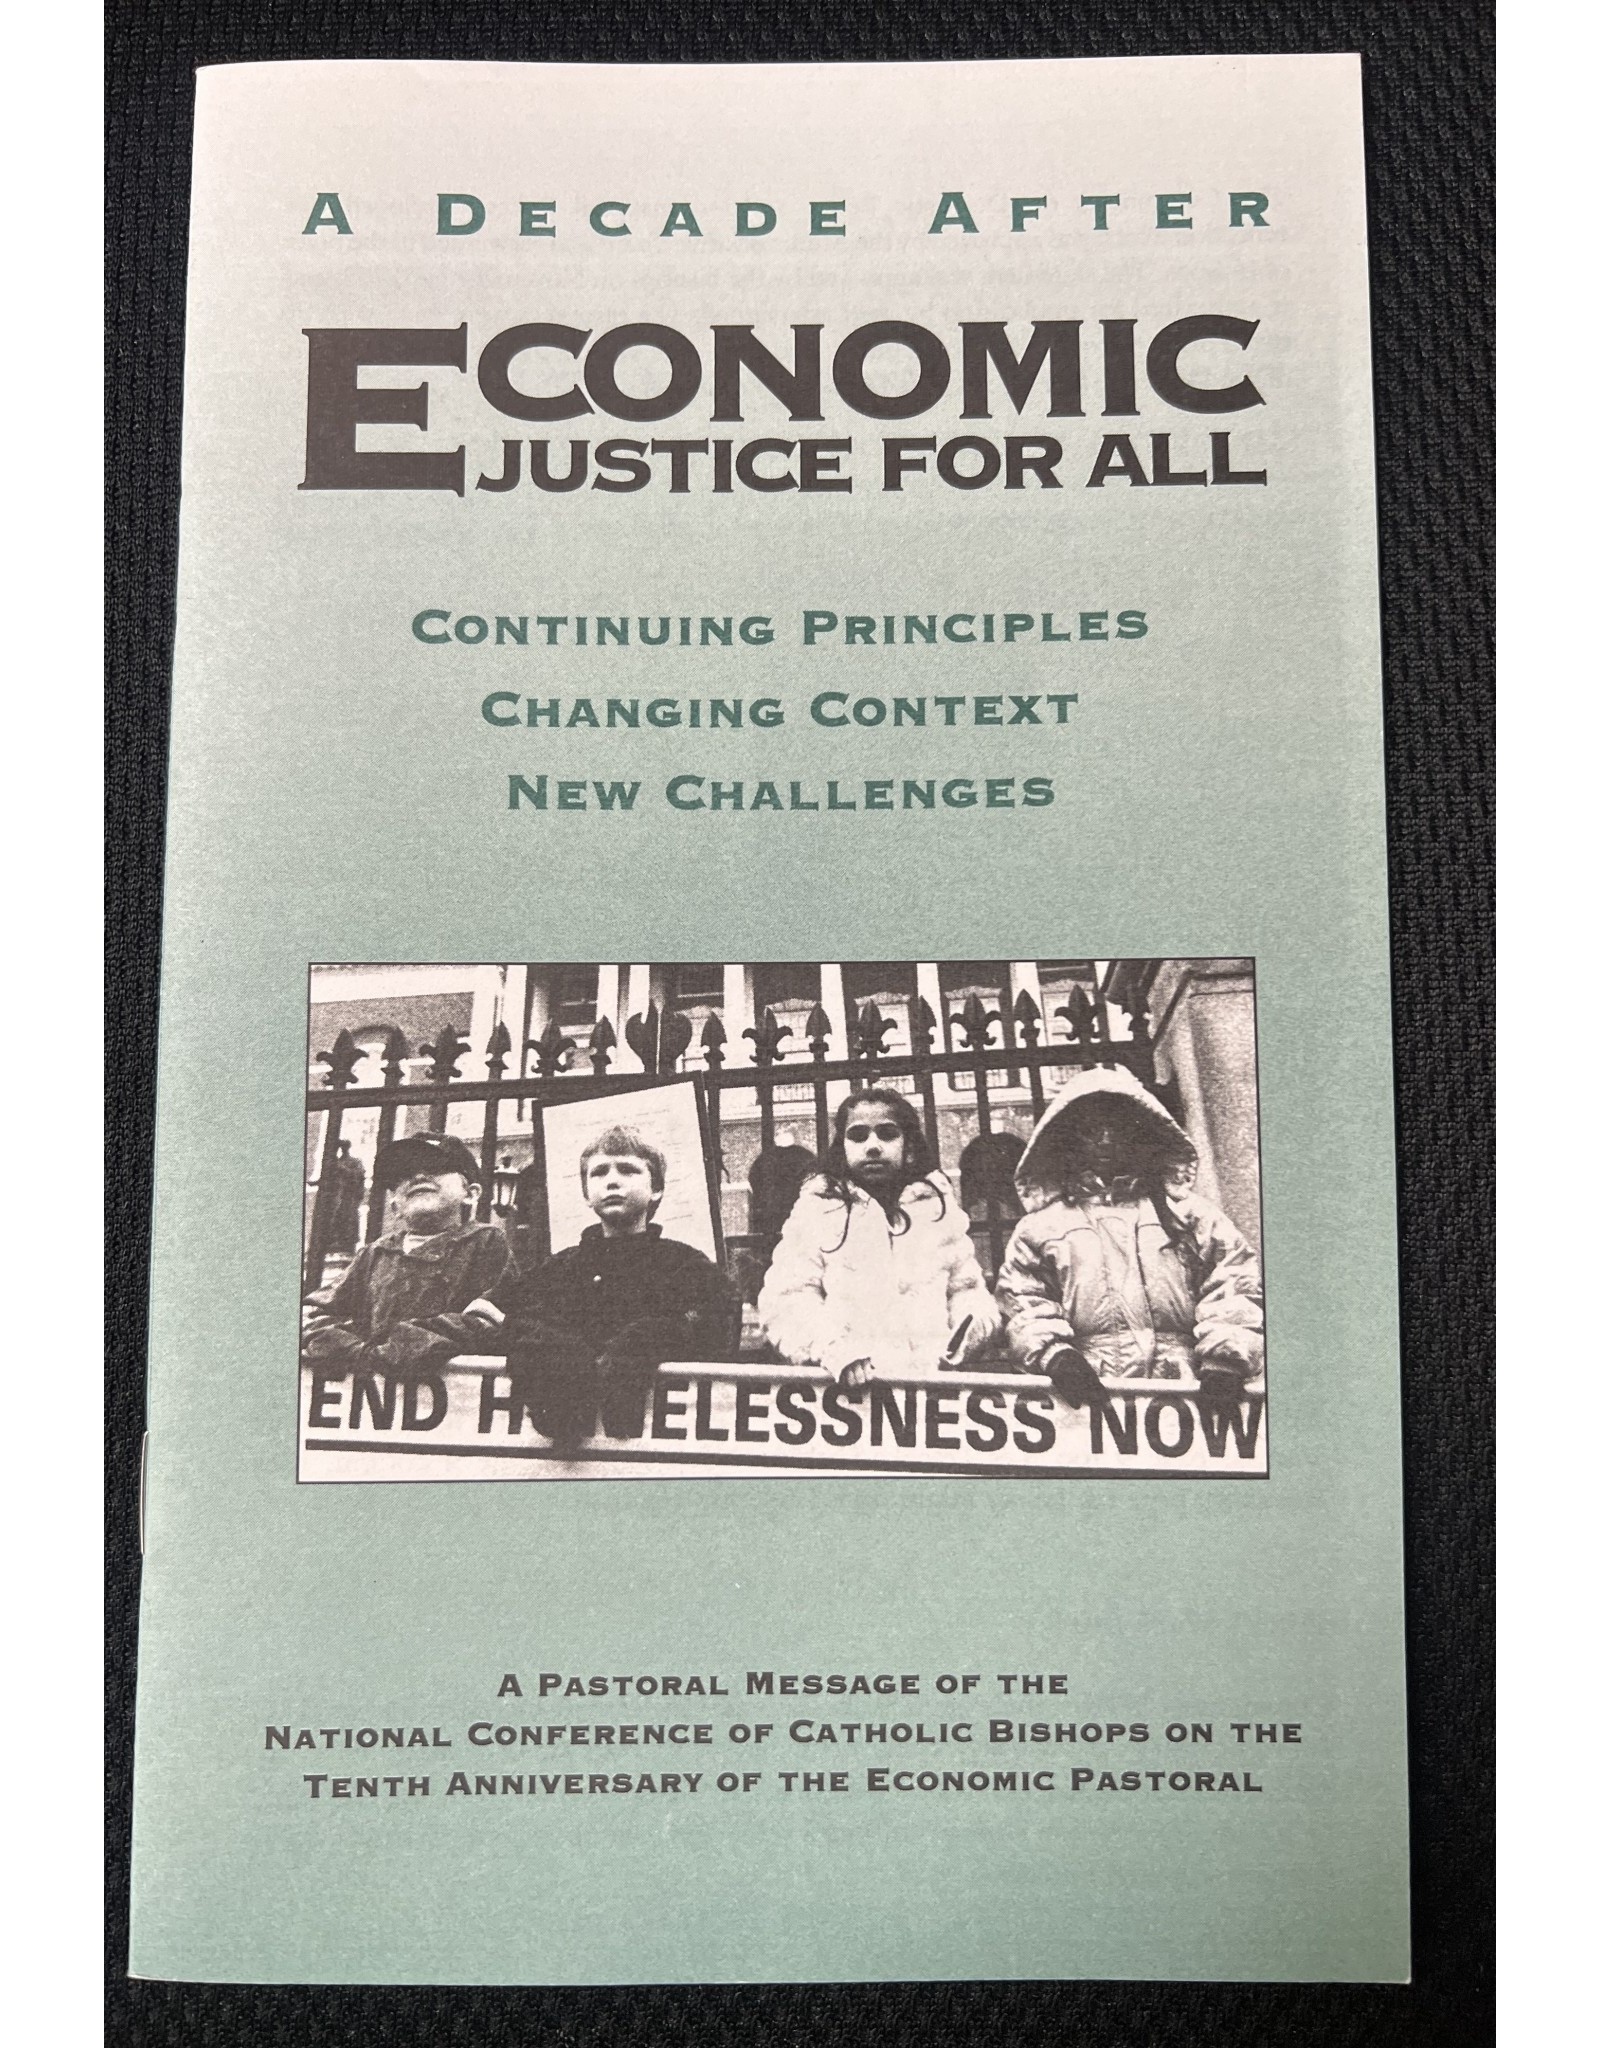 USCCB A Decade After "Economic Justice for All"